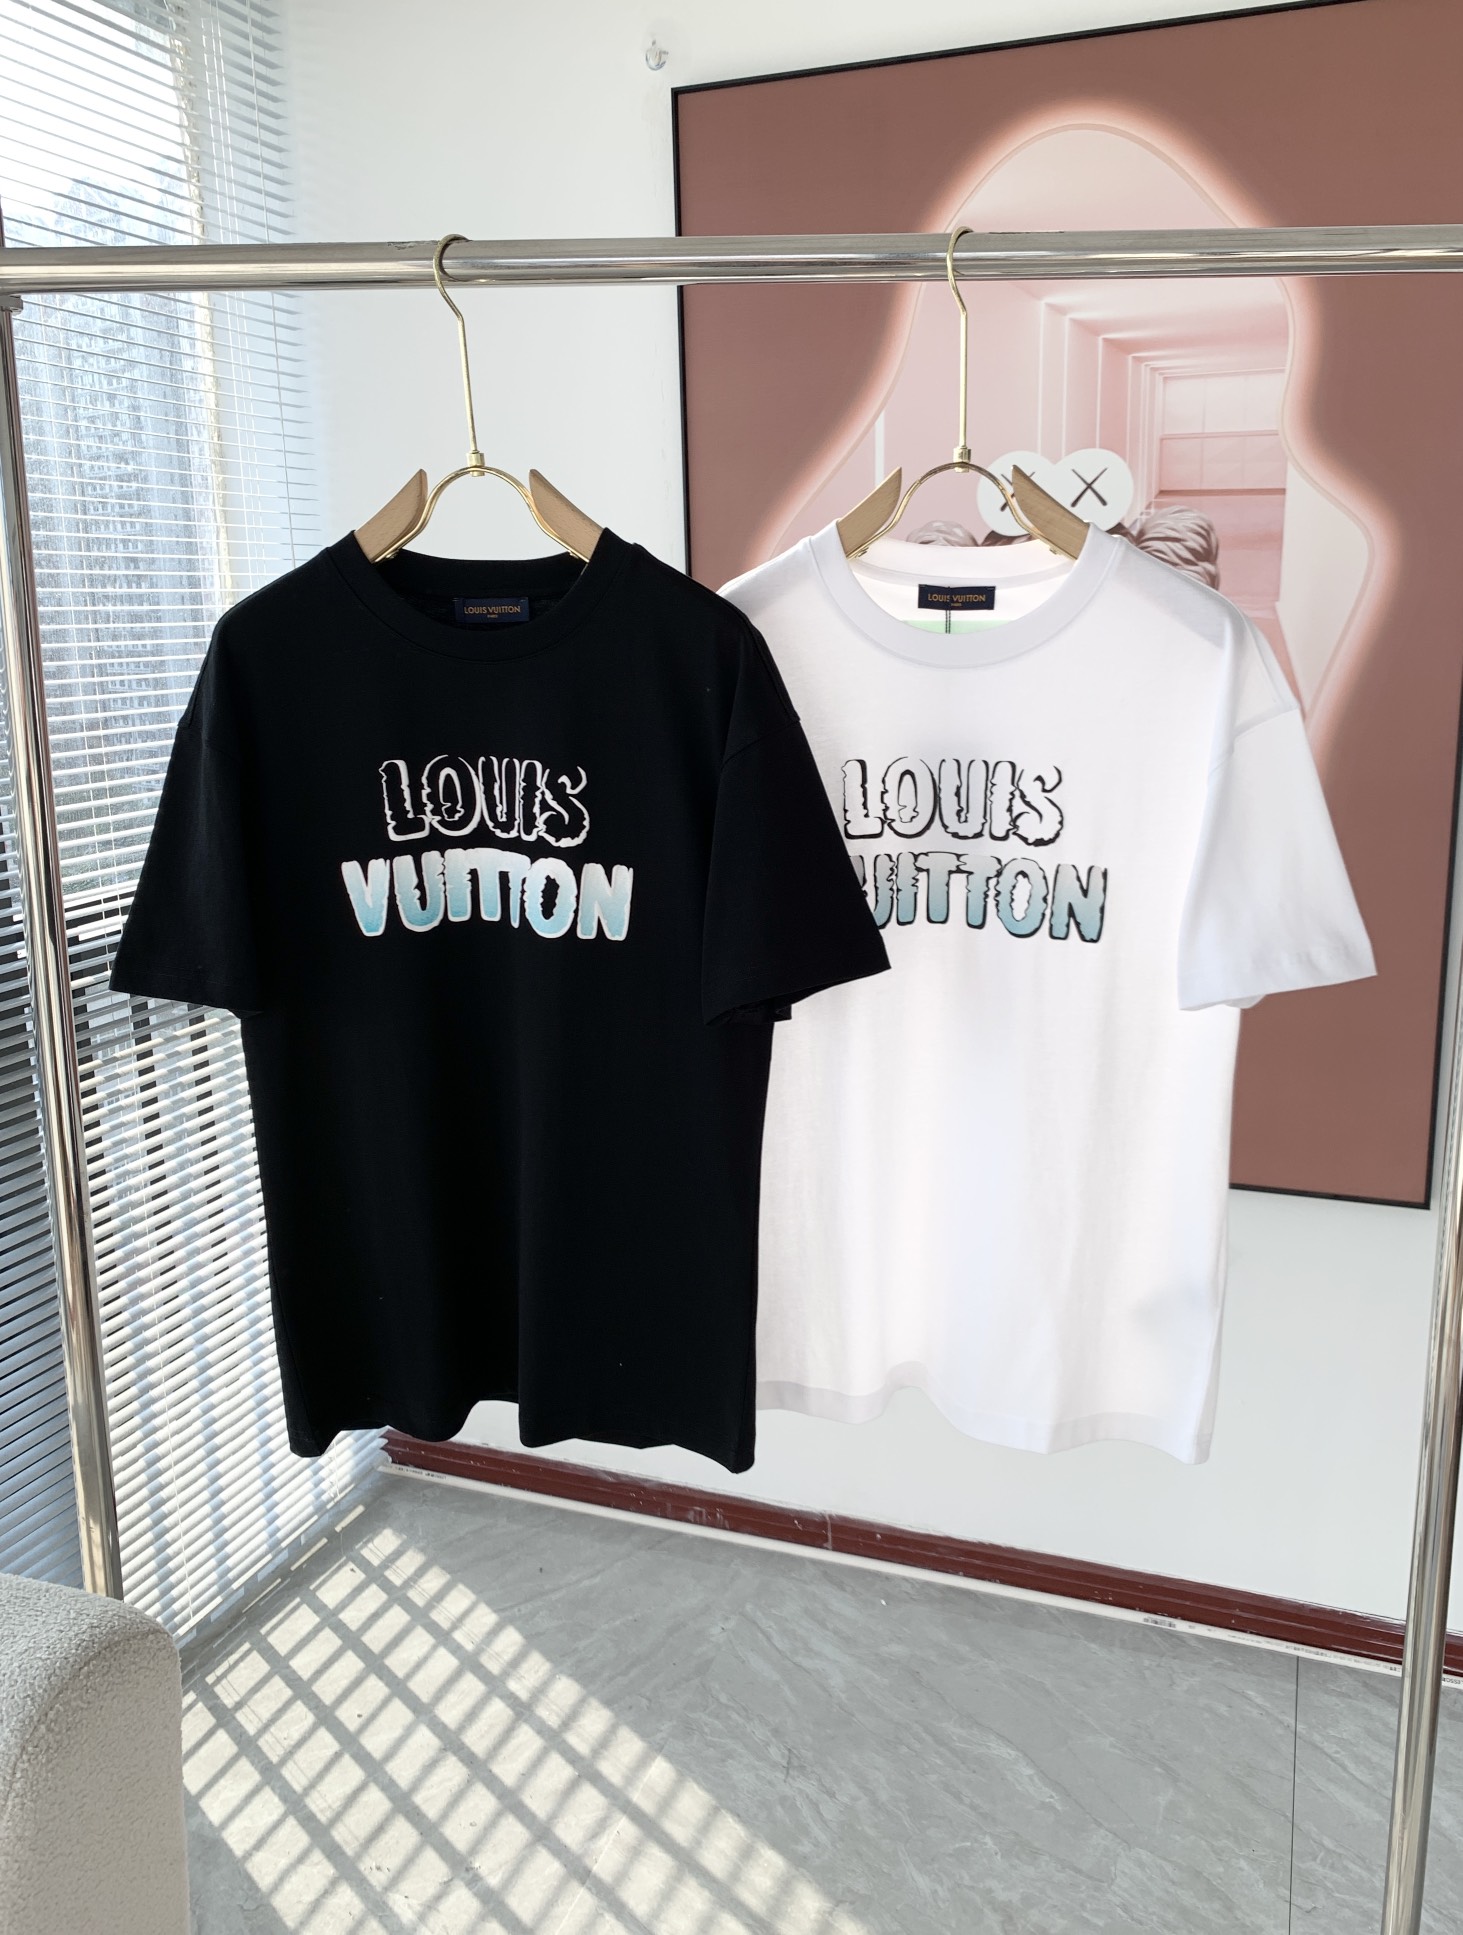 Louis Vuitton Clothing T-Shirt Sell High Quality
 Unisex Cotton Spring/Summer Collection Short Sleeve